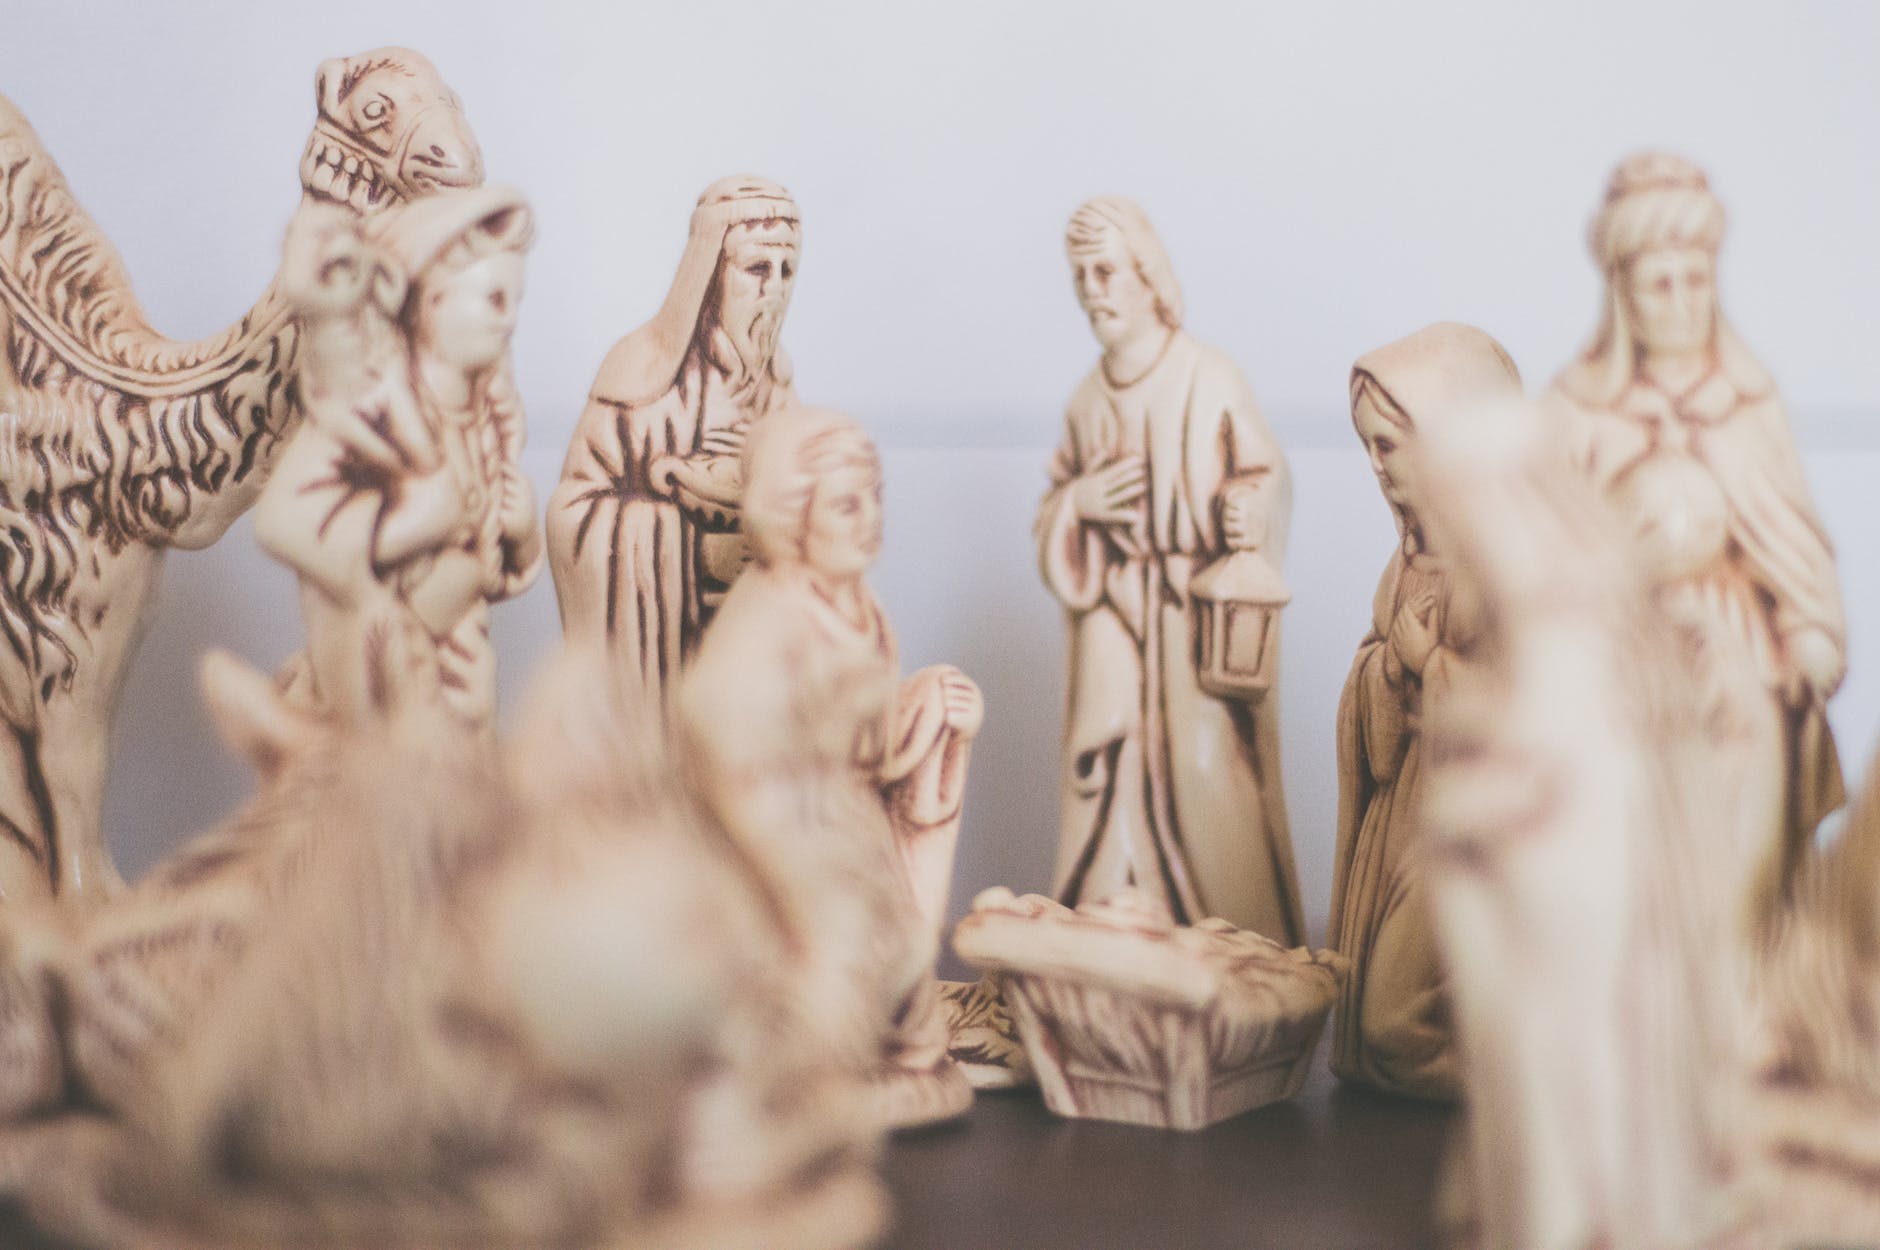 shallow focus photography of religious figurines wise men at the nativity scene